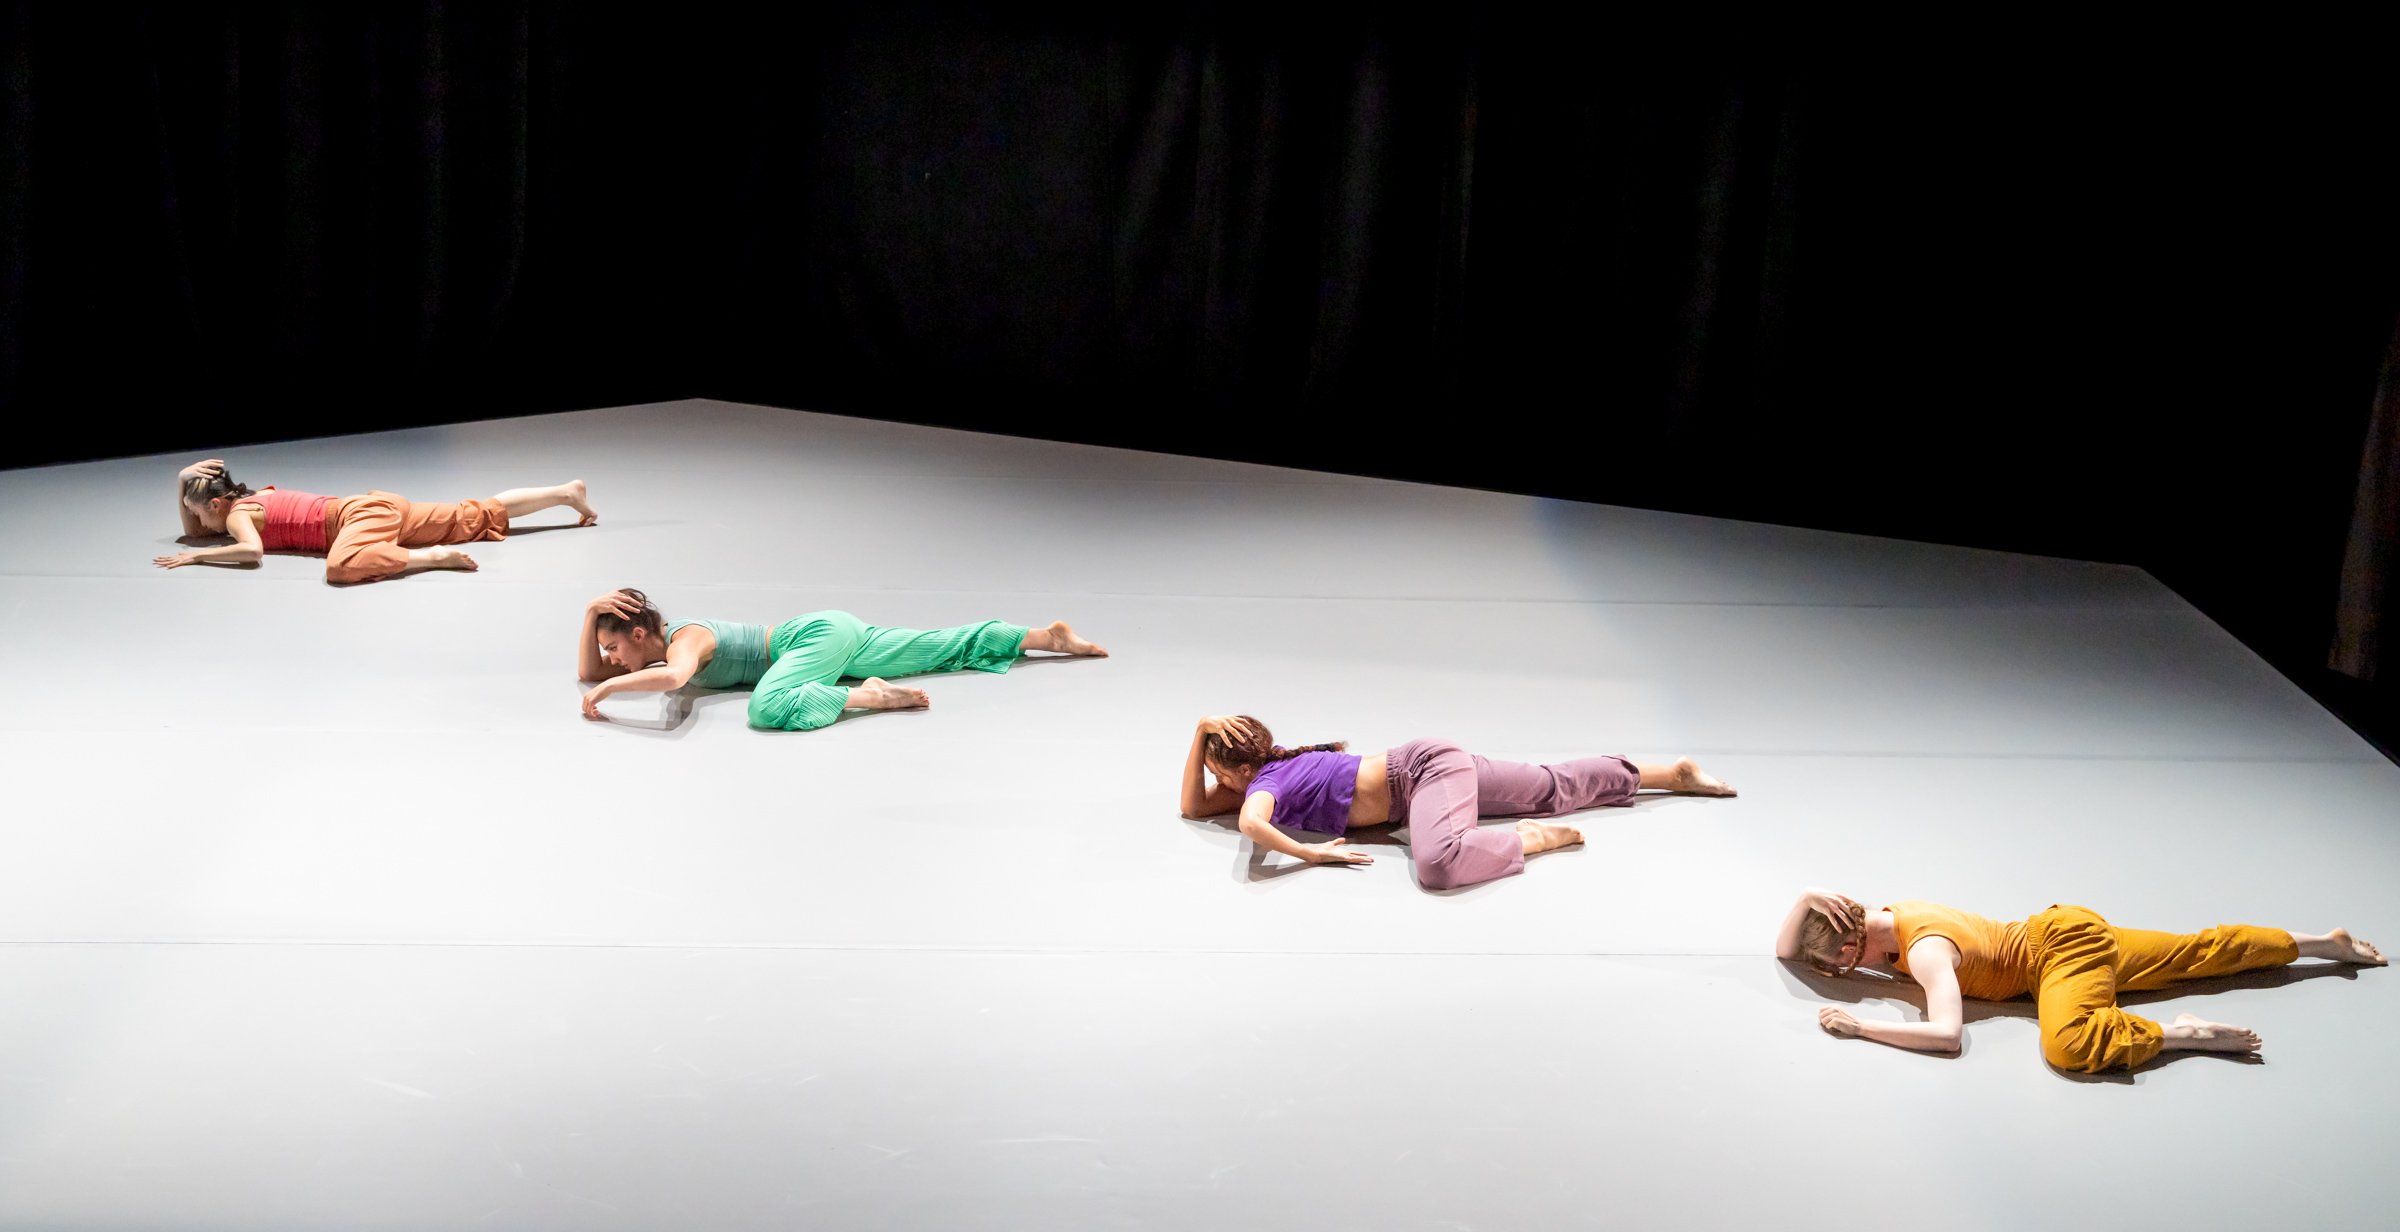 Four dancers, each wearing a different color, lay in nearly identical positions on a stark floor.